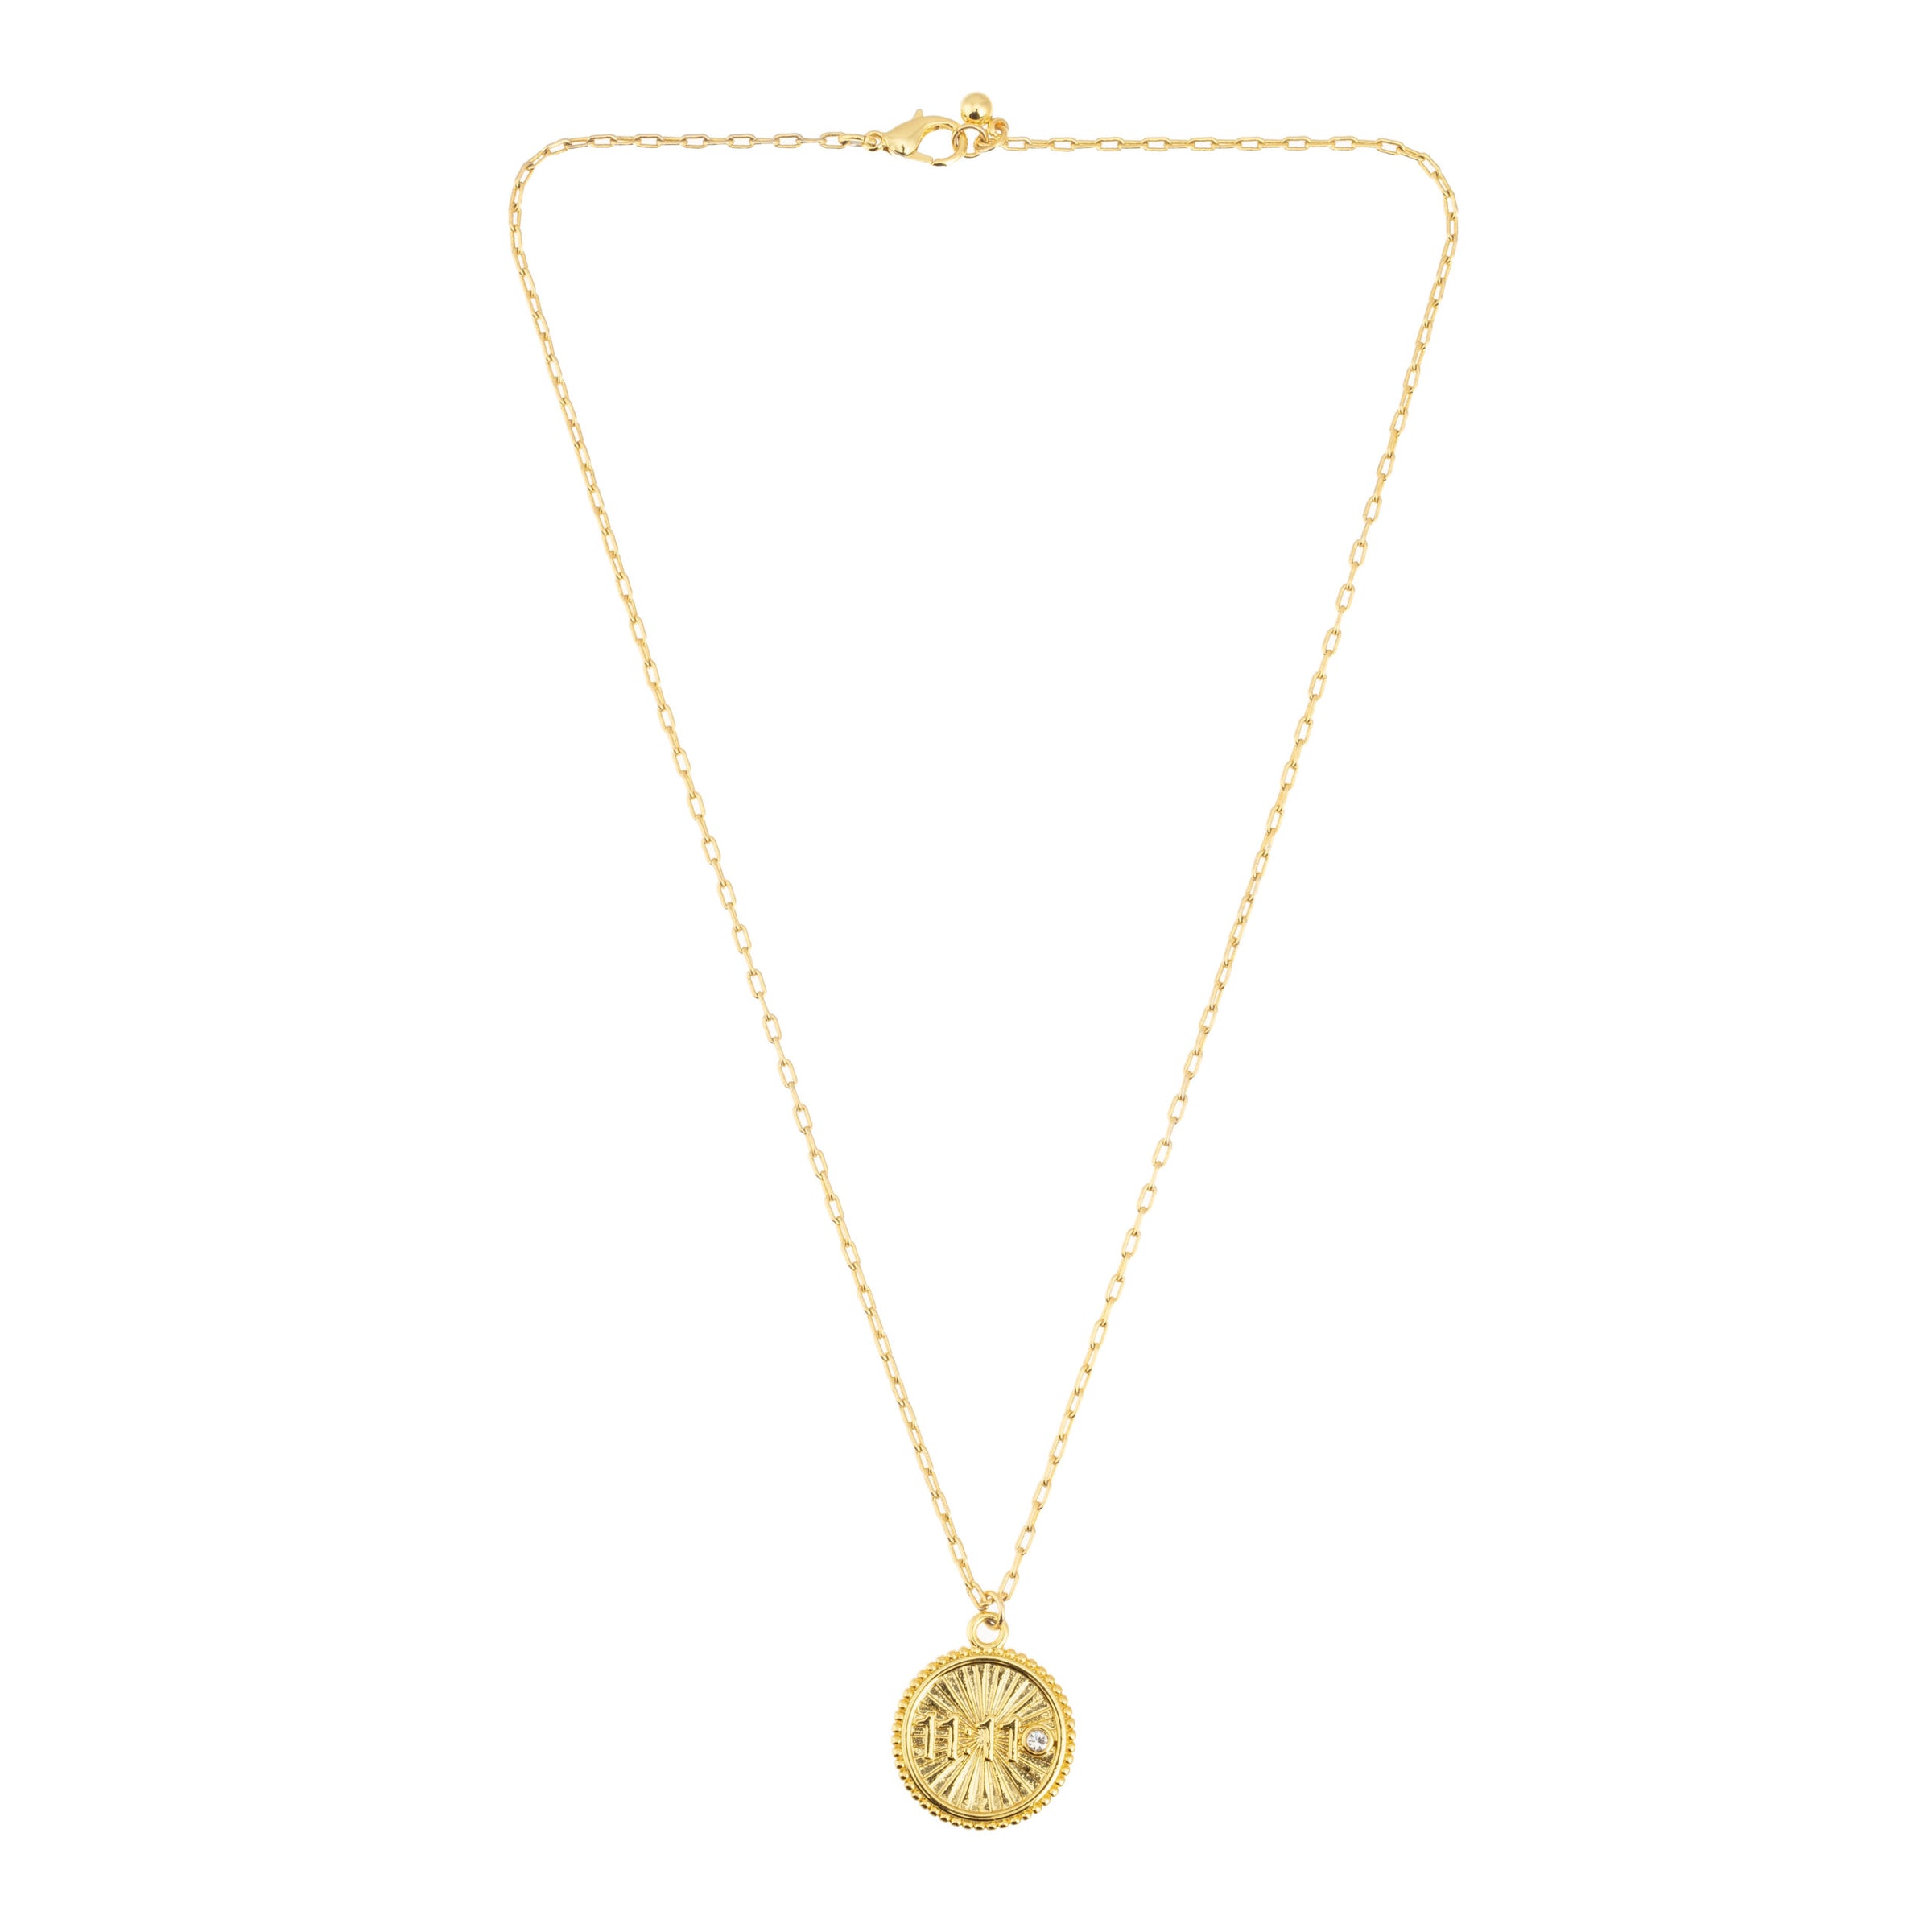 Gold plated brass pendant necklace with a pave stone 